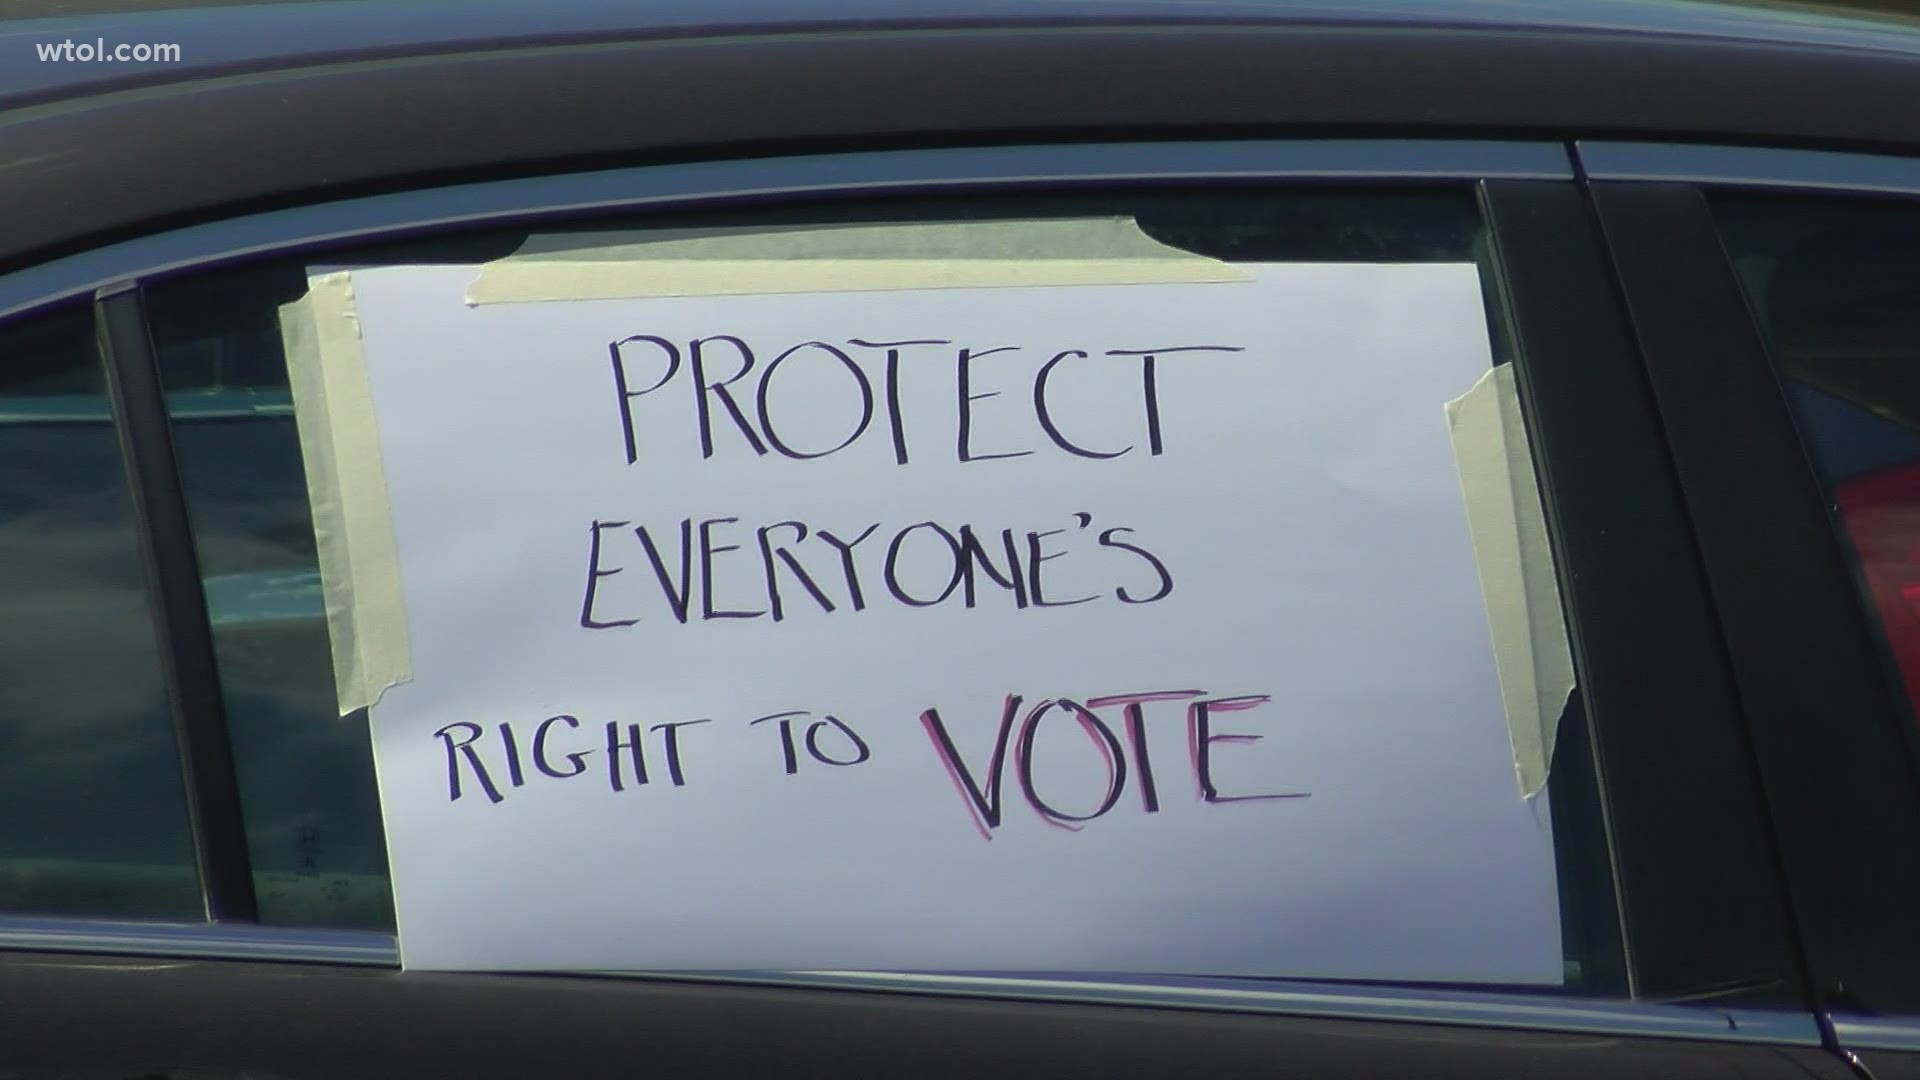 The effort was part of a nationwide effort to promote voting rights. Some local state representatives also came out against H.B. 294, which overhauls voting in Ohio.